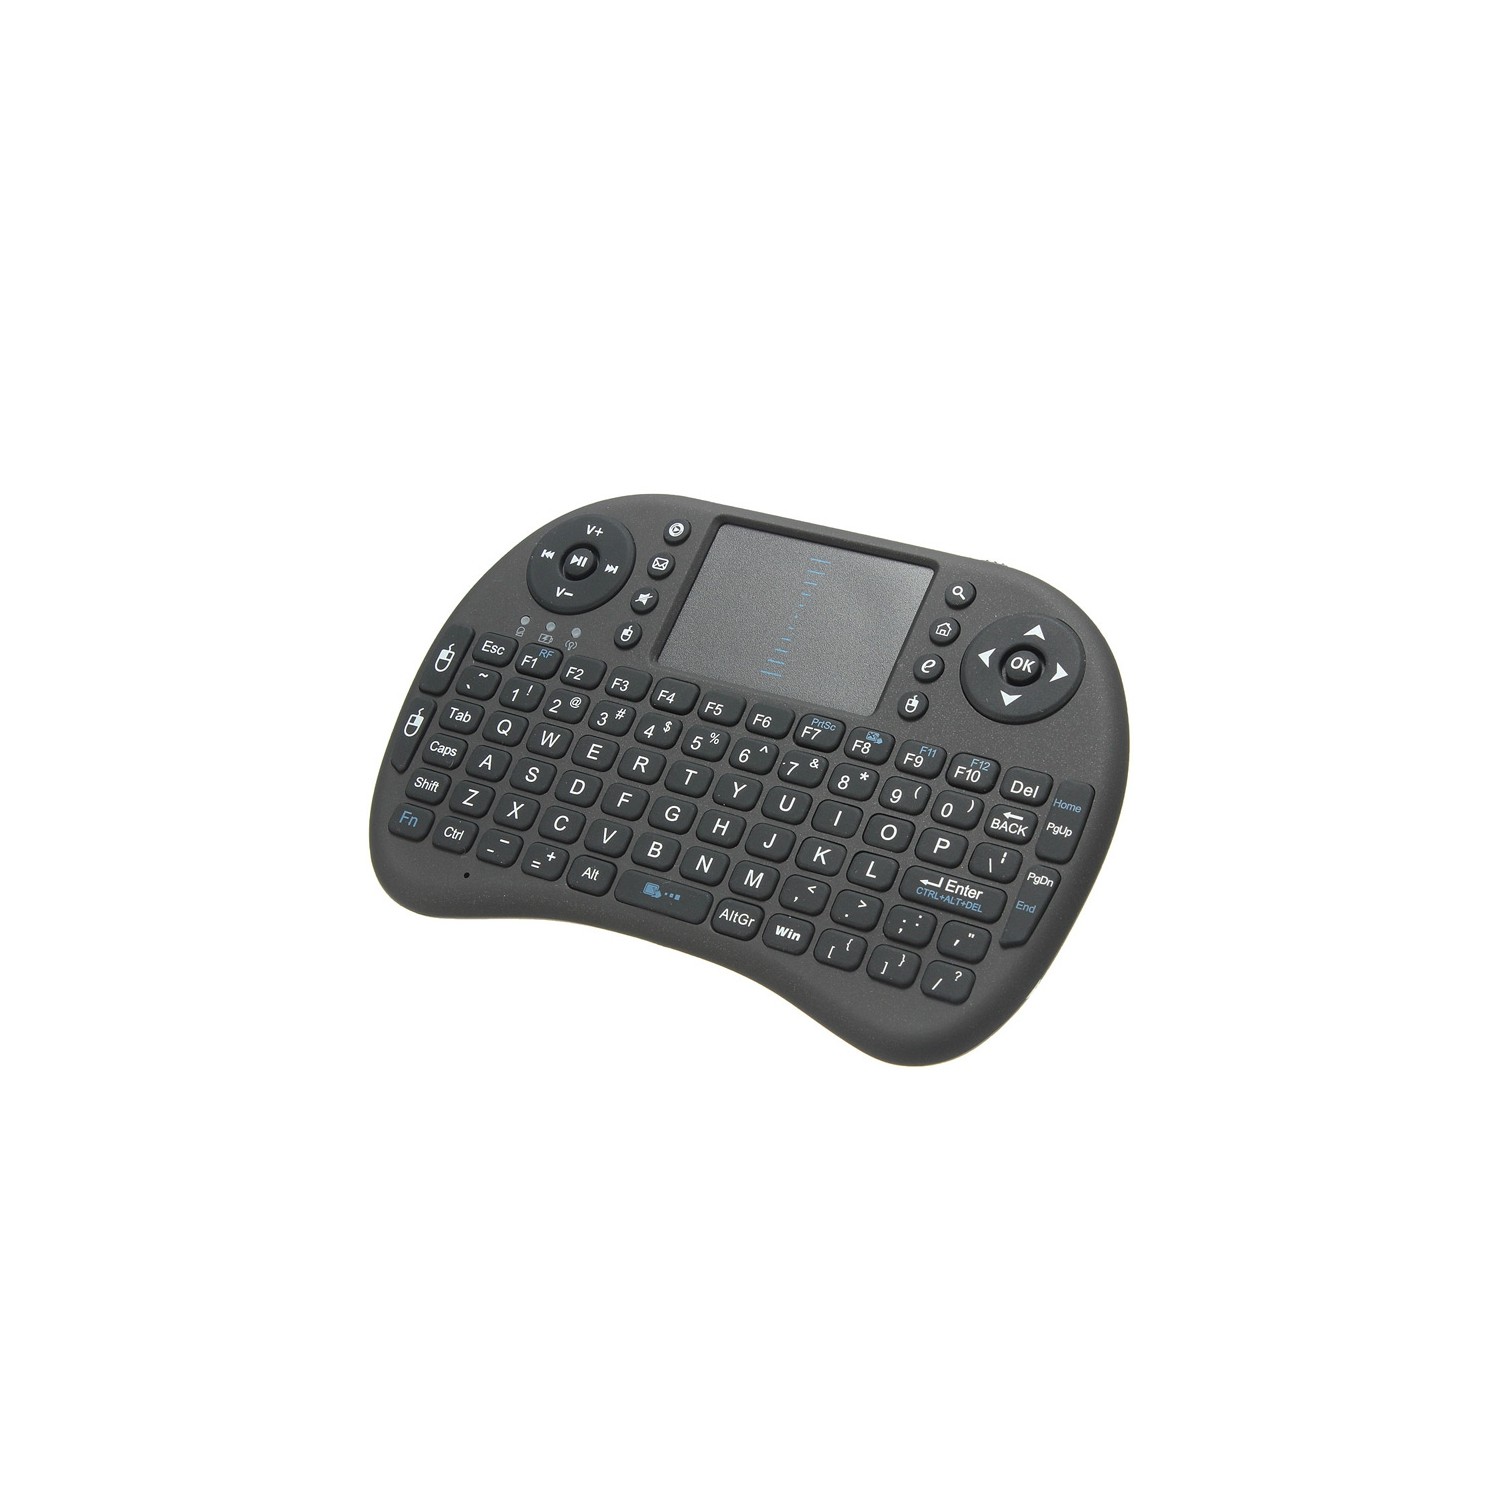 axGear Wireless Keyboard 2.4G with Touchpad Cprdless Mini Handheld Plam Keypad for PC Android Tablet